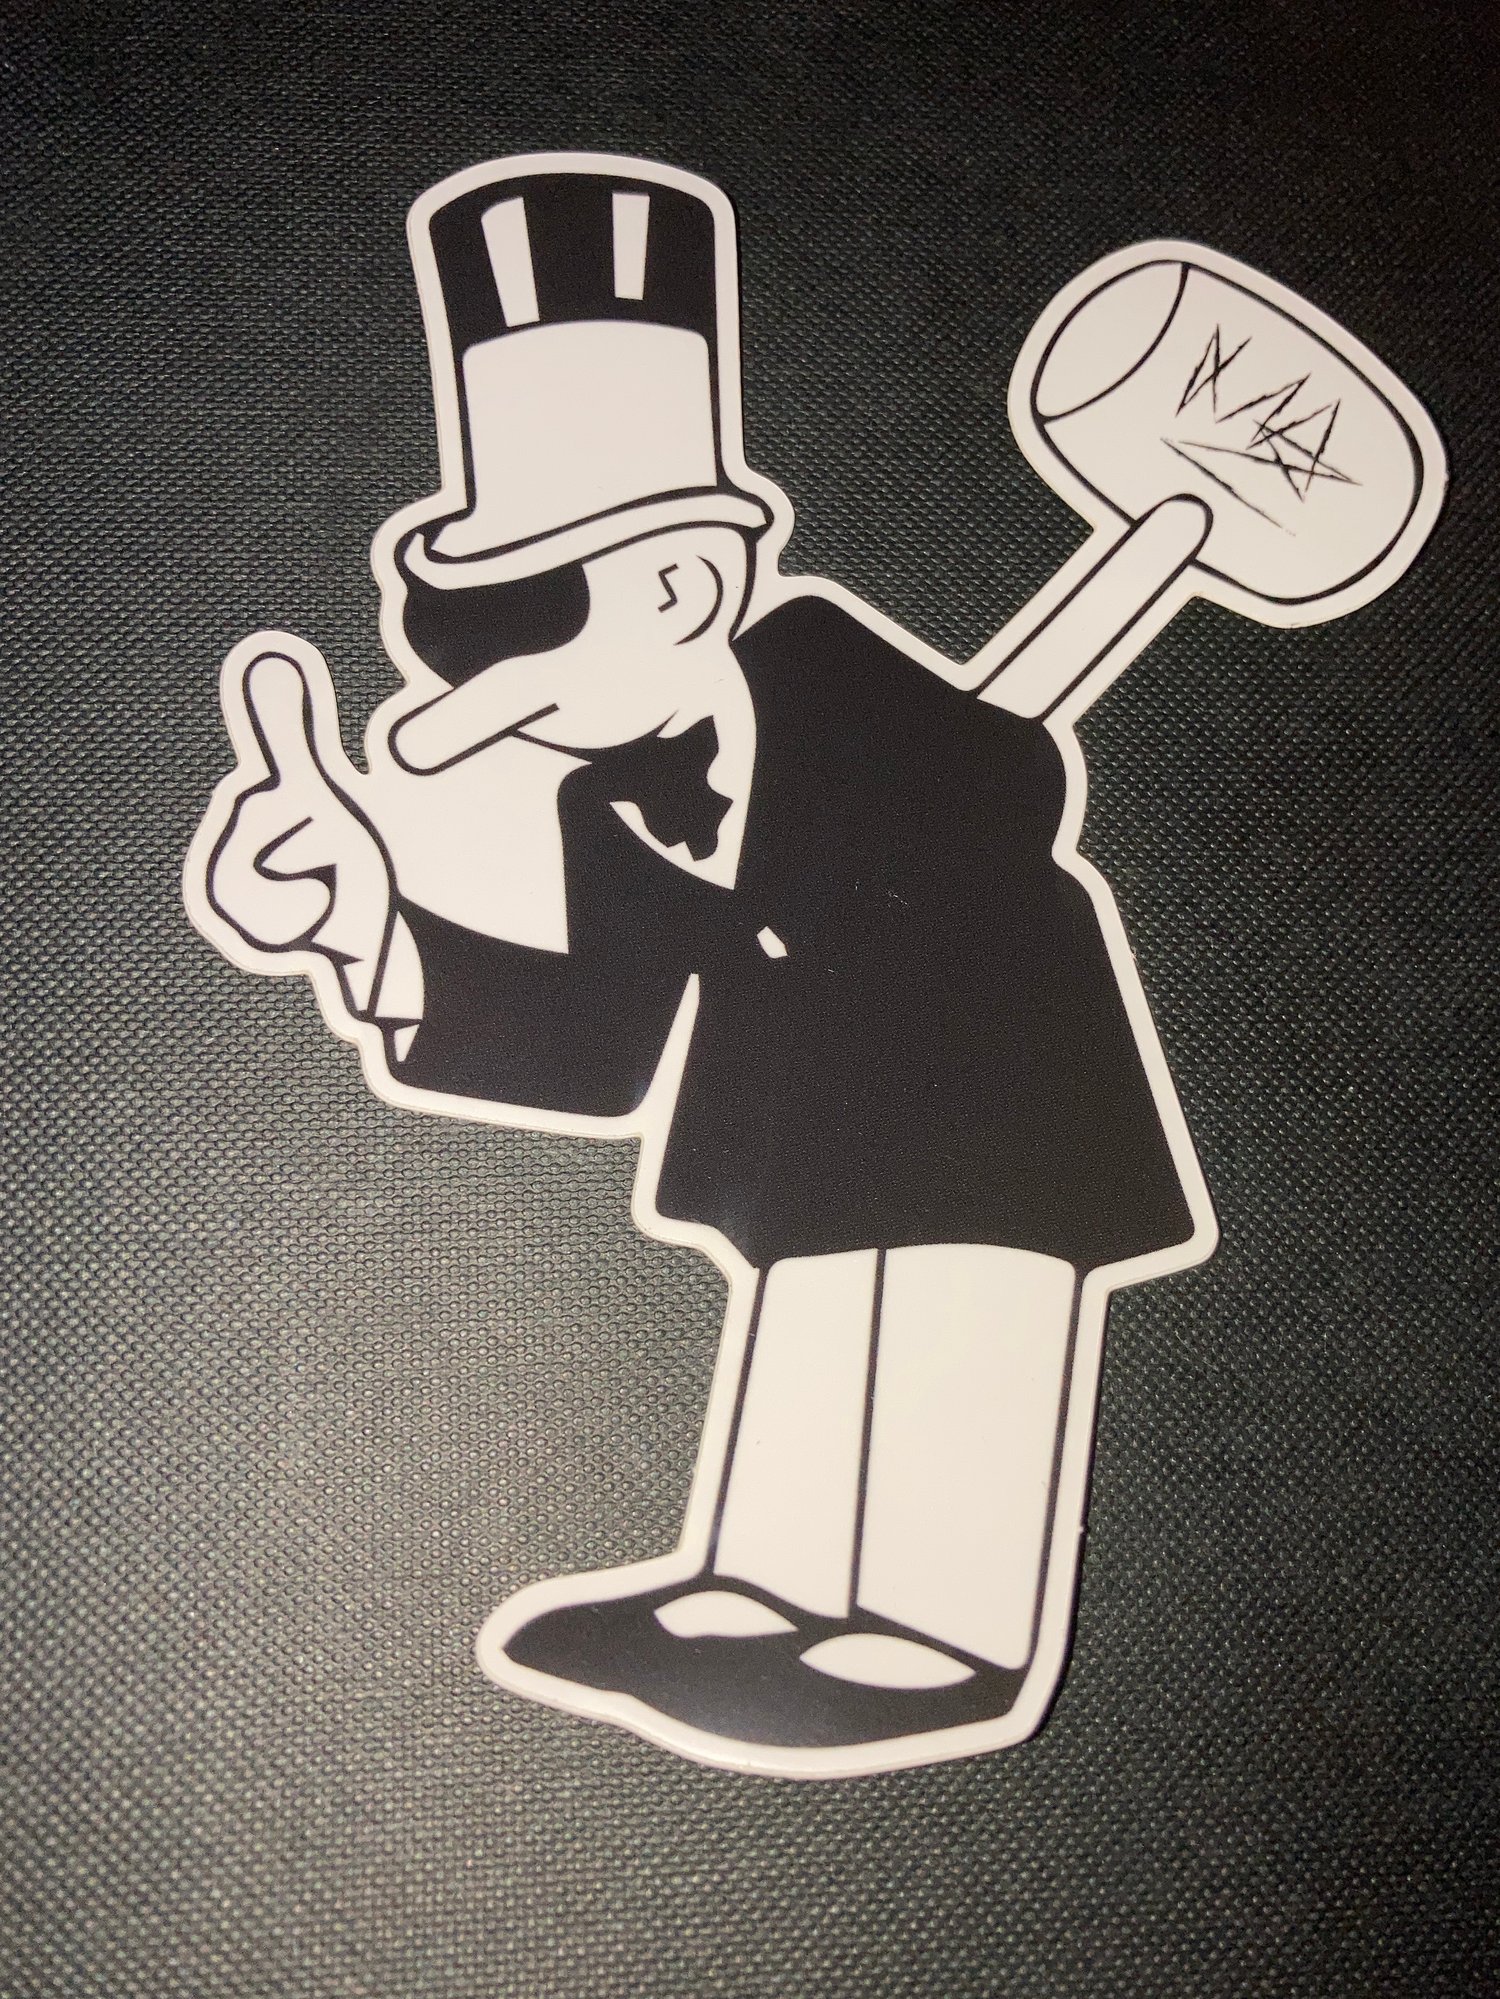 Image of M.A.Z TOP-HAT AUTHORITARIAN